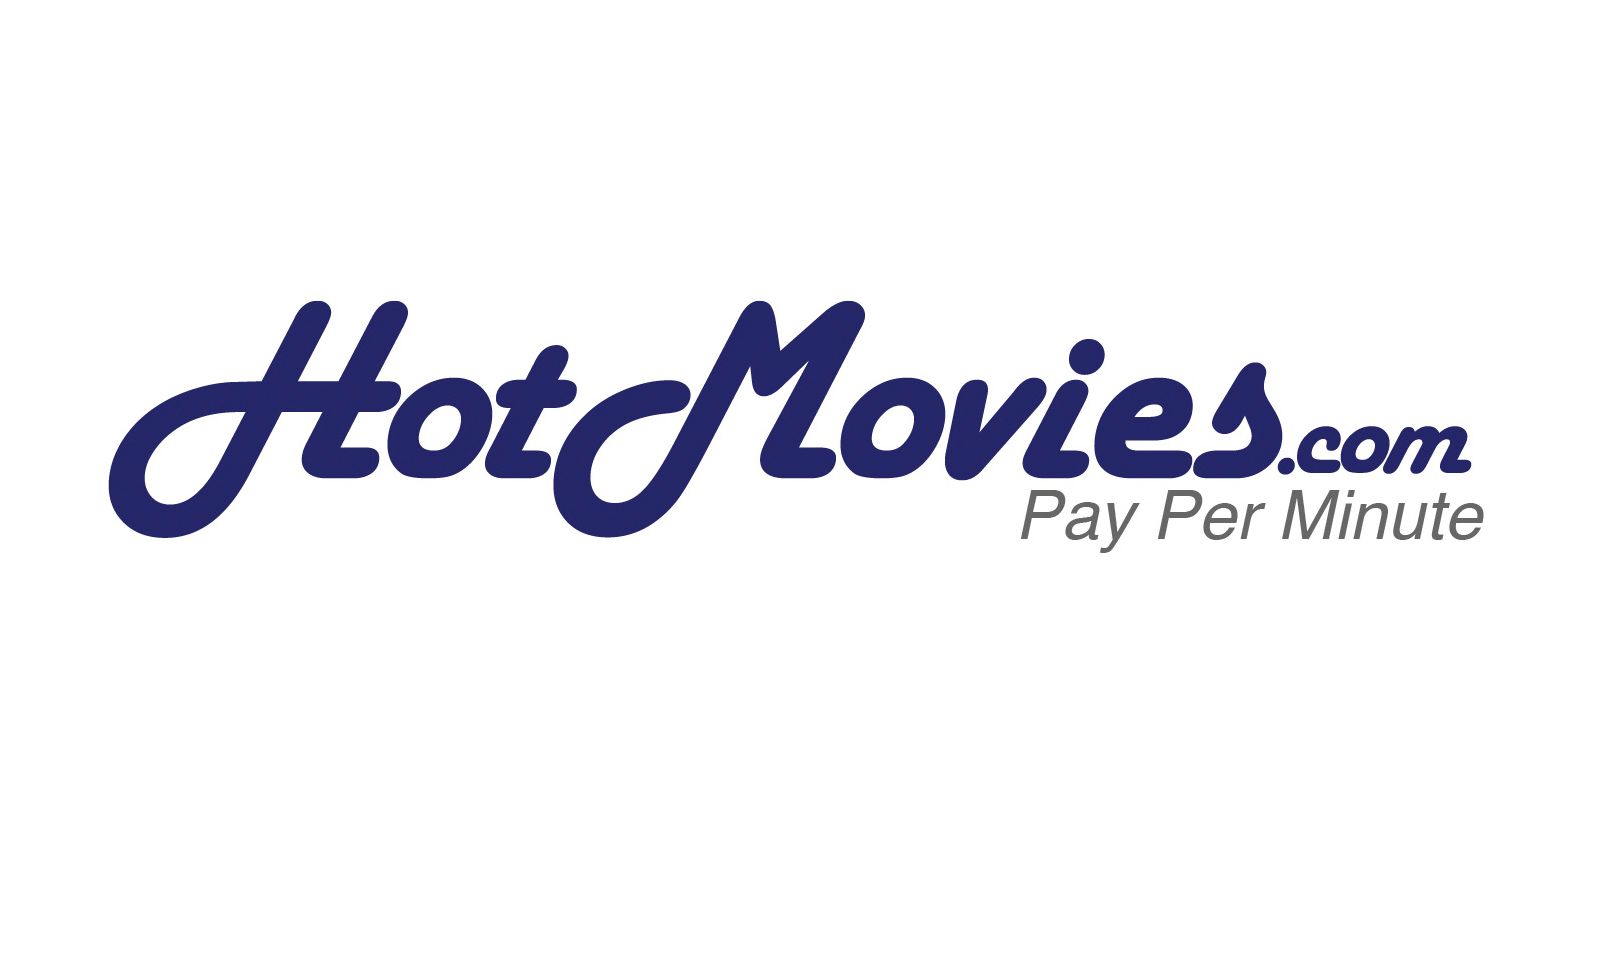 HotMovies.com to Host 3rd Annual Porn Star Bracket Tourney to Benefit Charity